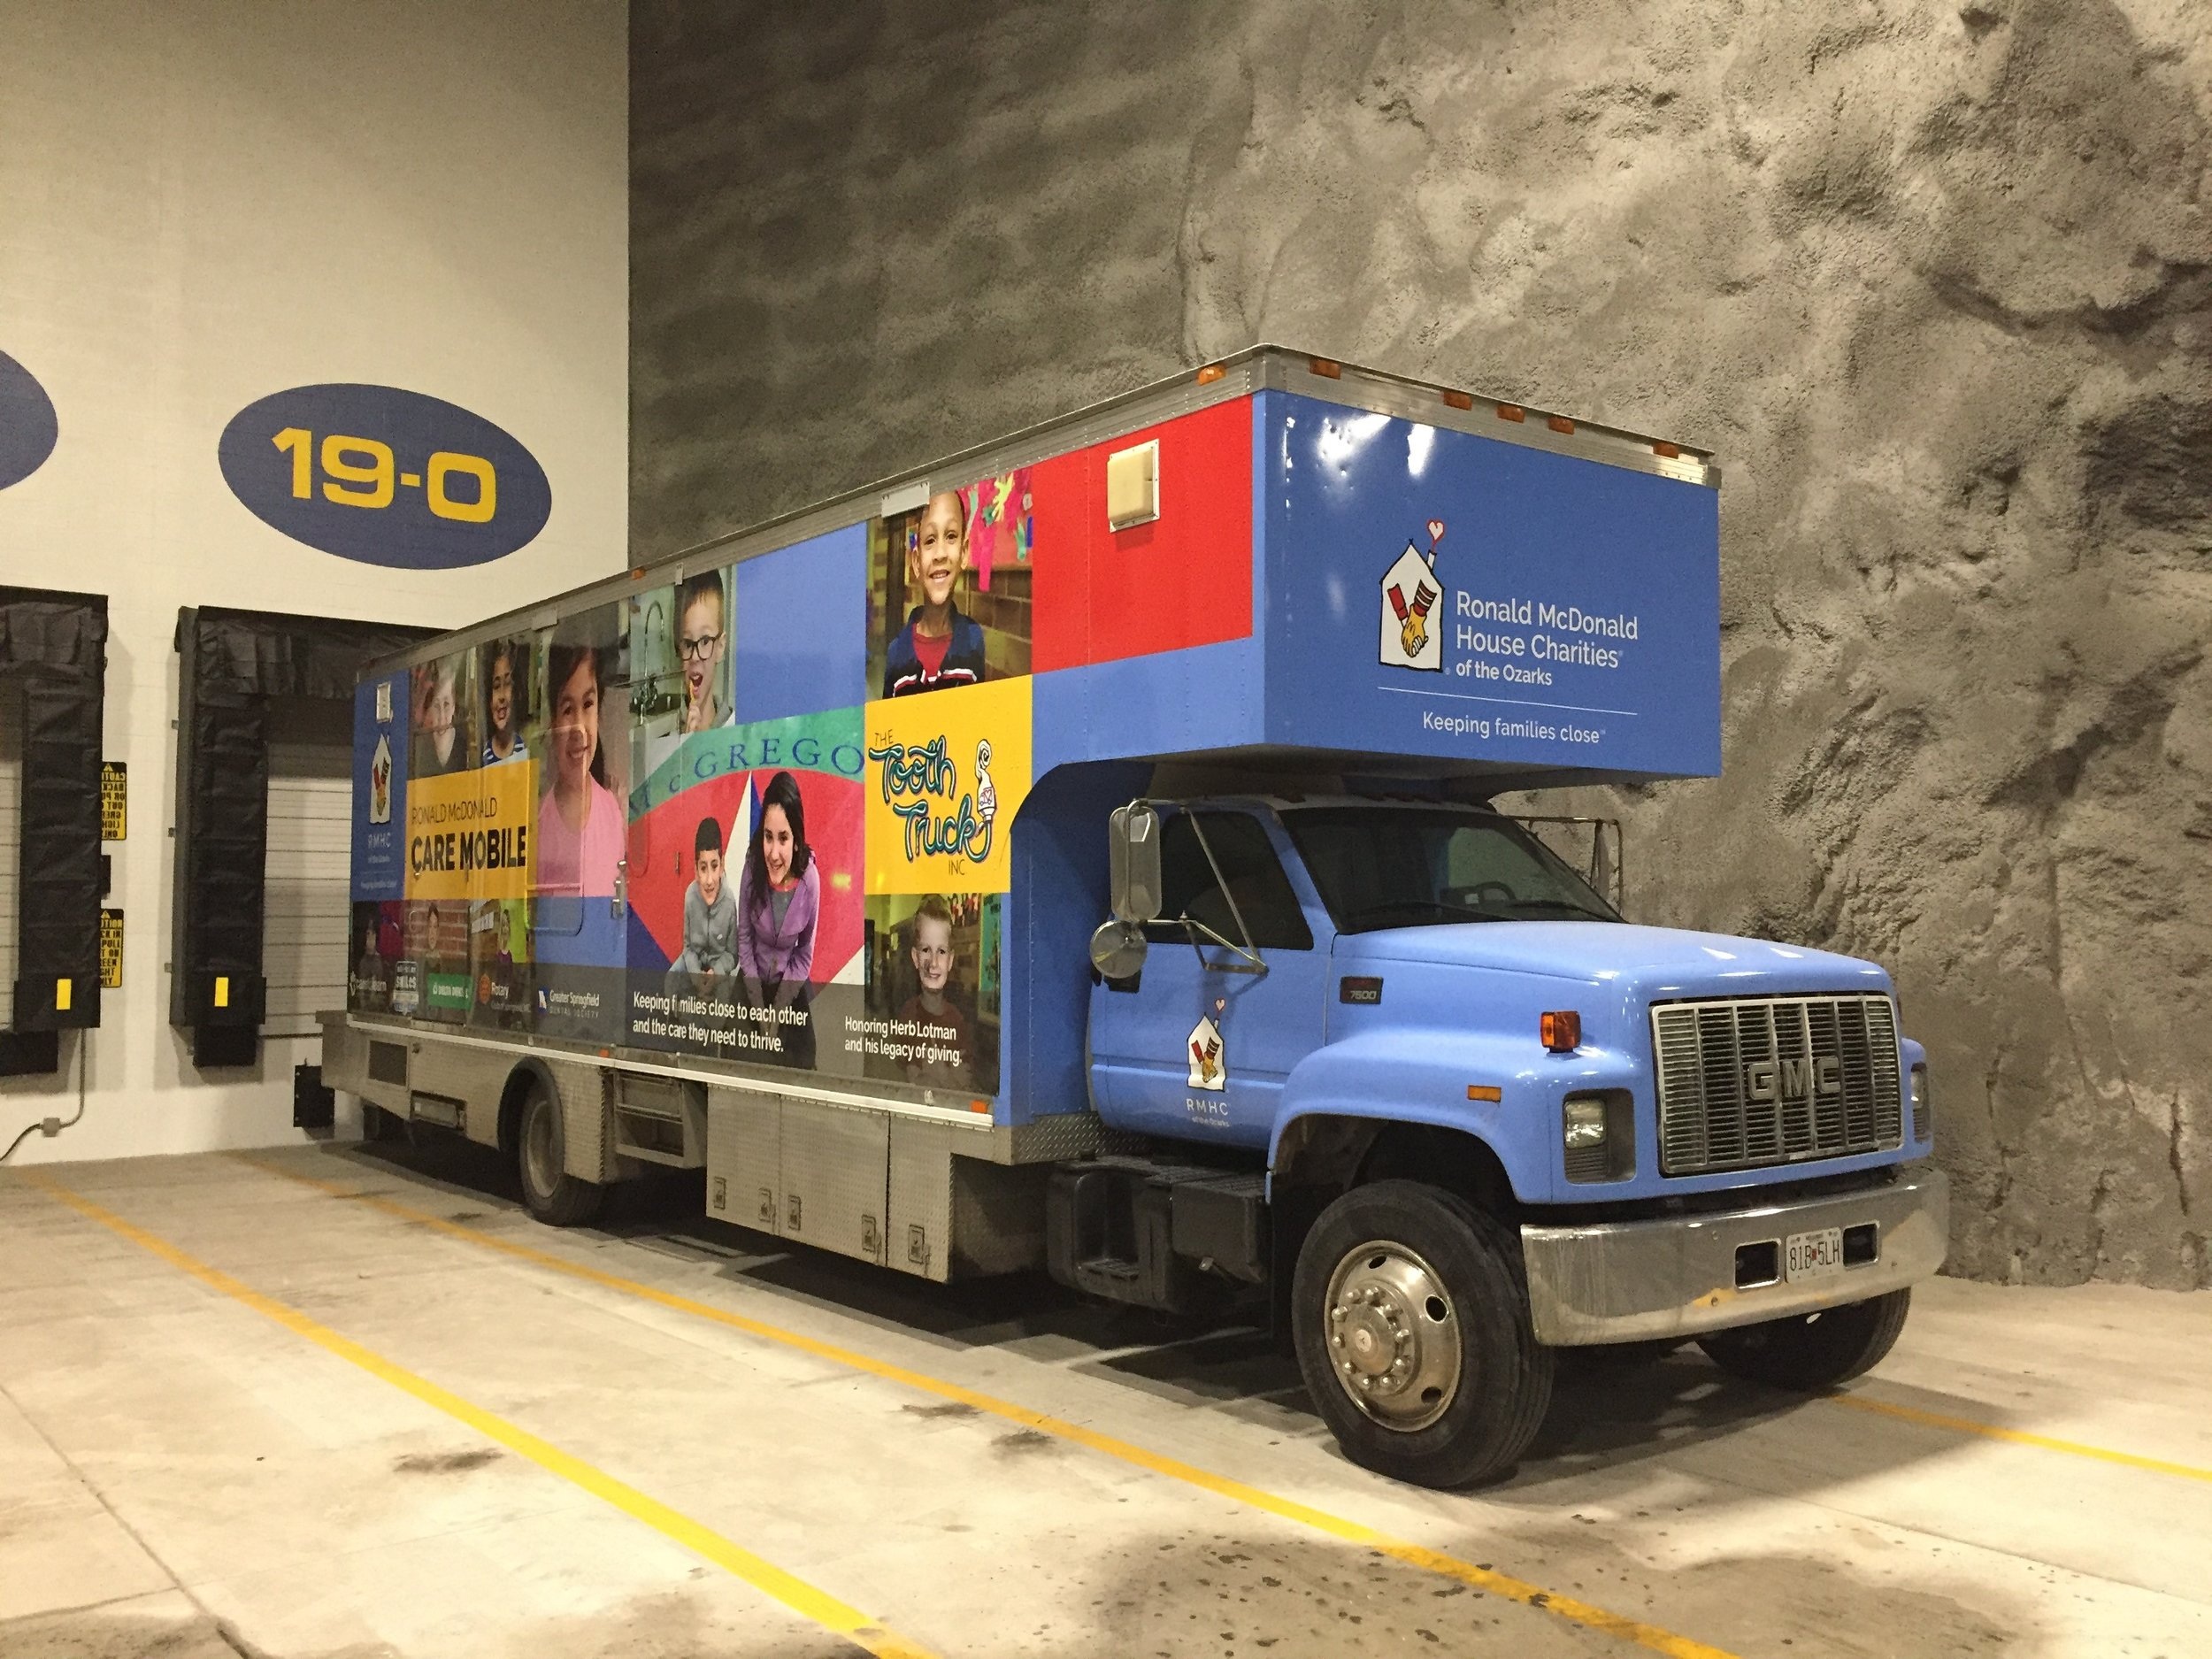  The Ronald McDonald House Tooth Truck, which has provided free dental care to over 24,000 children in the Ozarks, spends cold nights inside Springfield Underground to keep the engine warm and enable them to keep to their busy schedule serving our ar